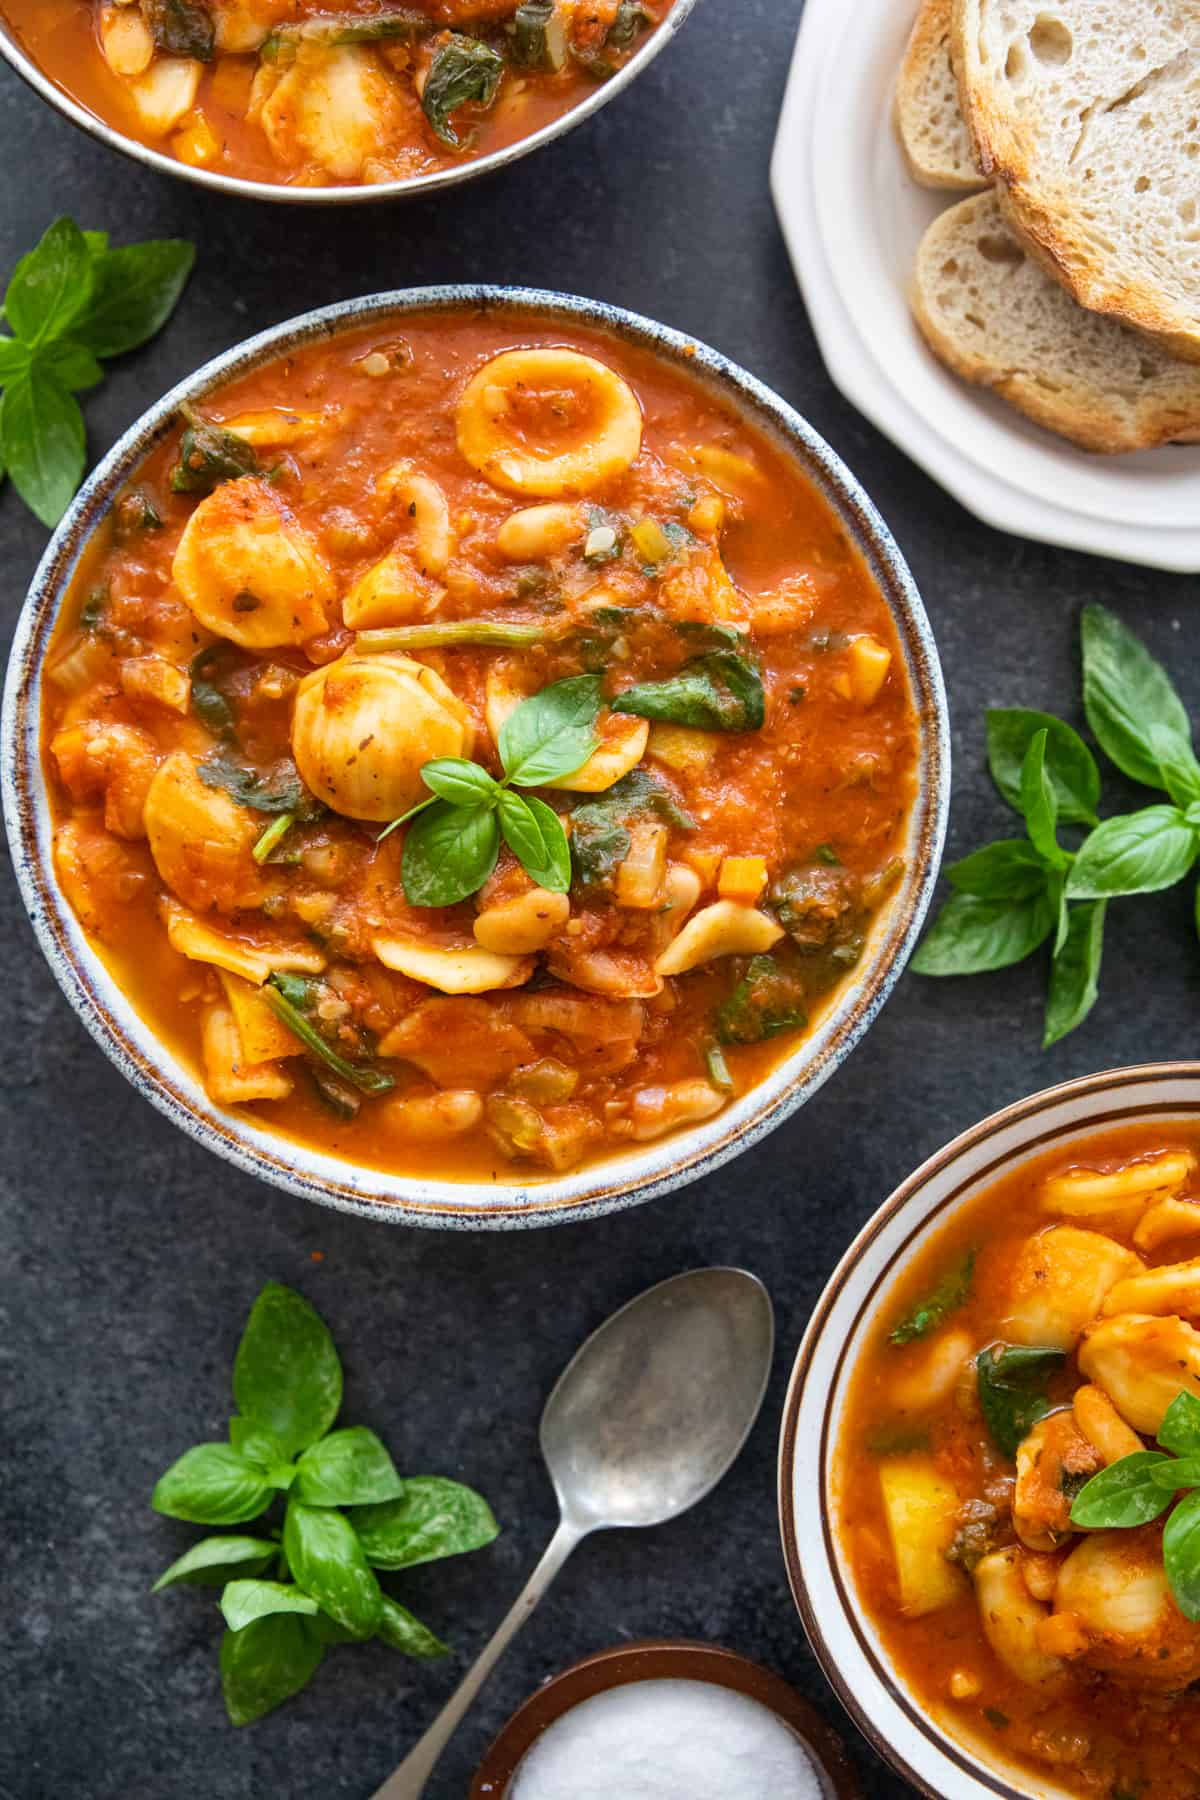 This minestrone soup recipe is delicious and easy to make. It's loaded with vegetables, beans and pasta - perfect for a hearty meal on a cold day!
